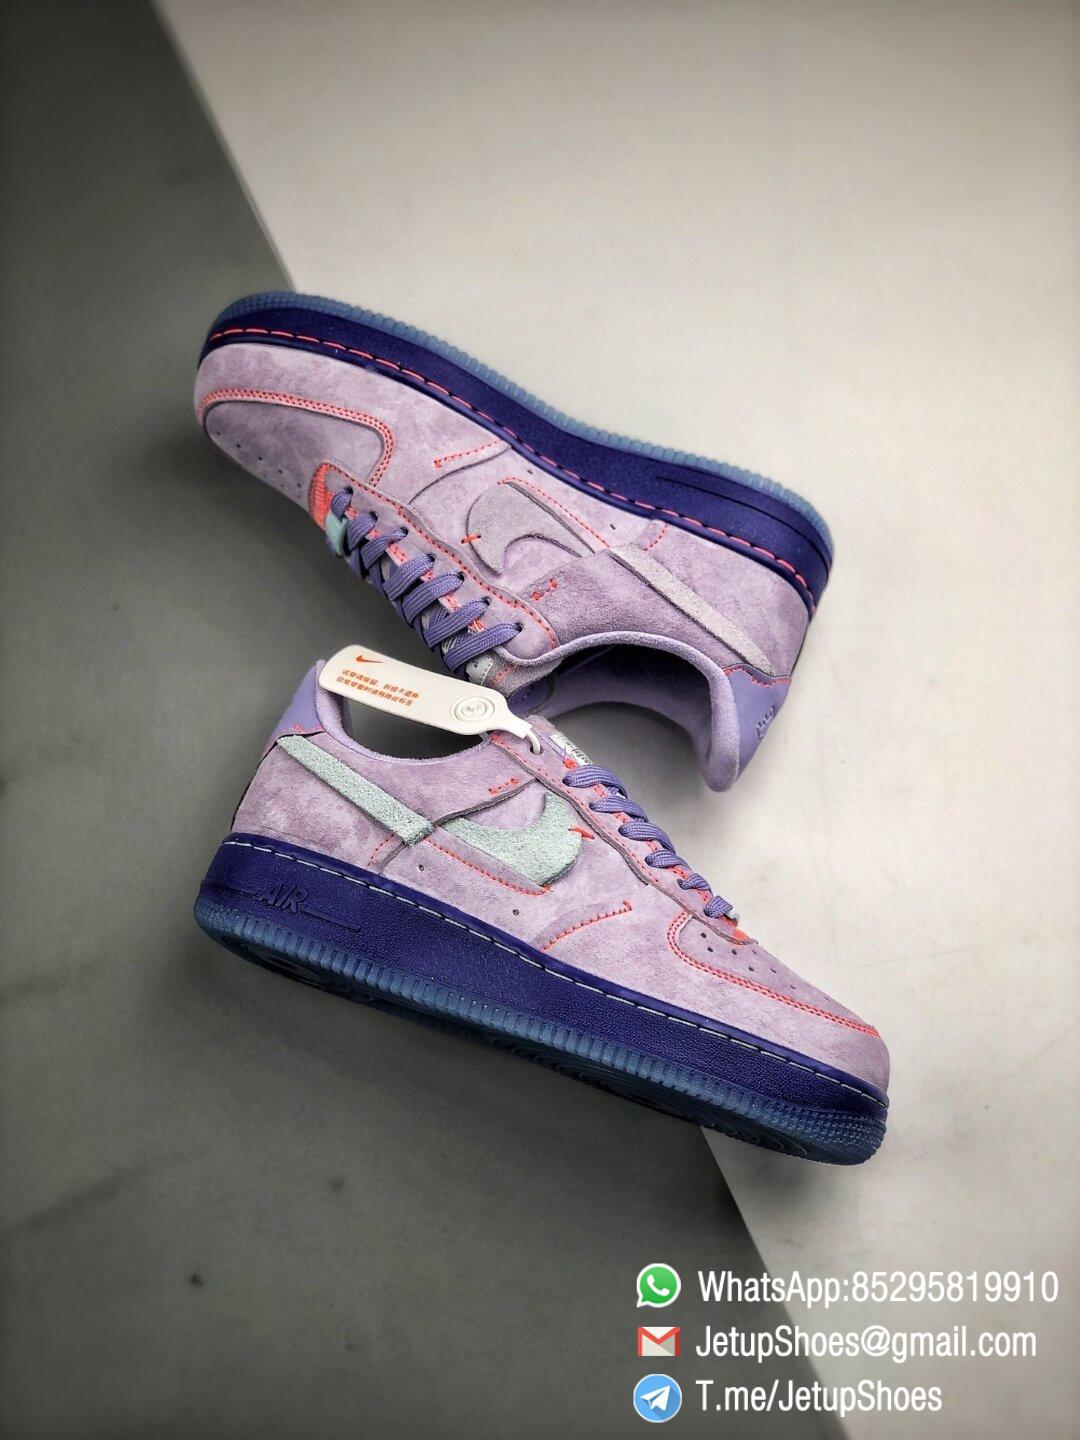 blue and purple air forces